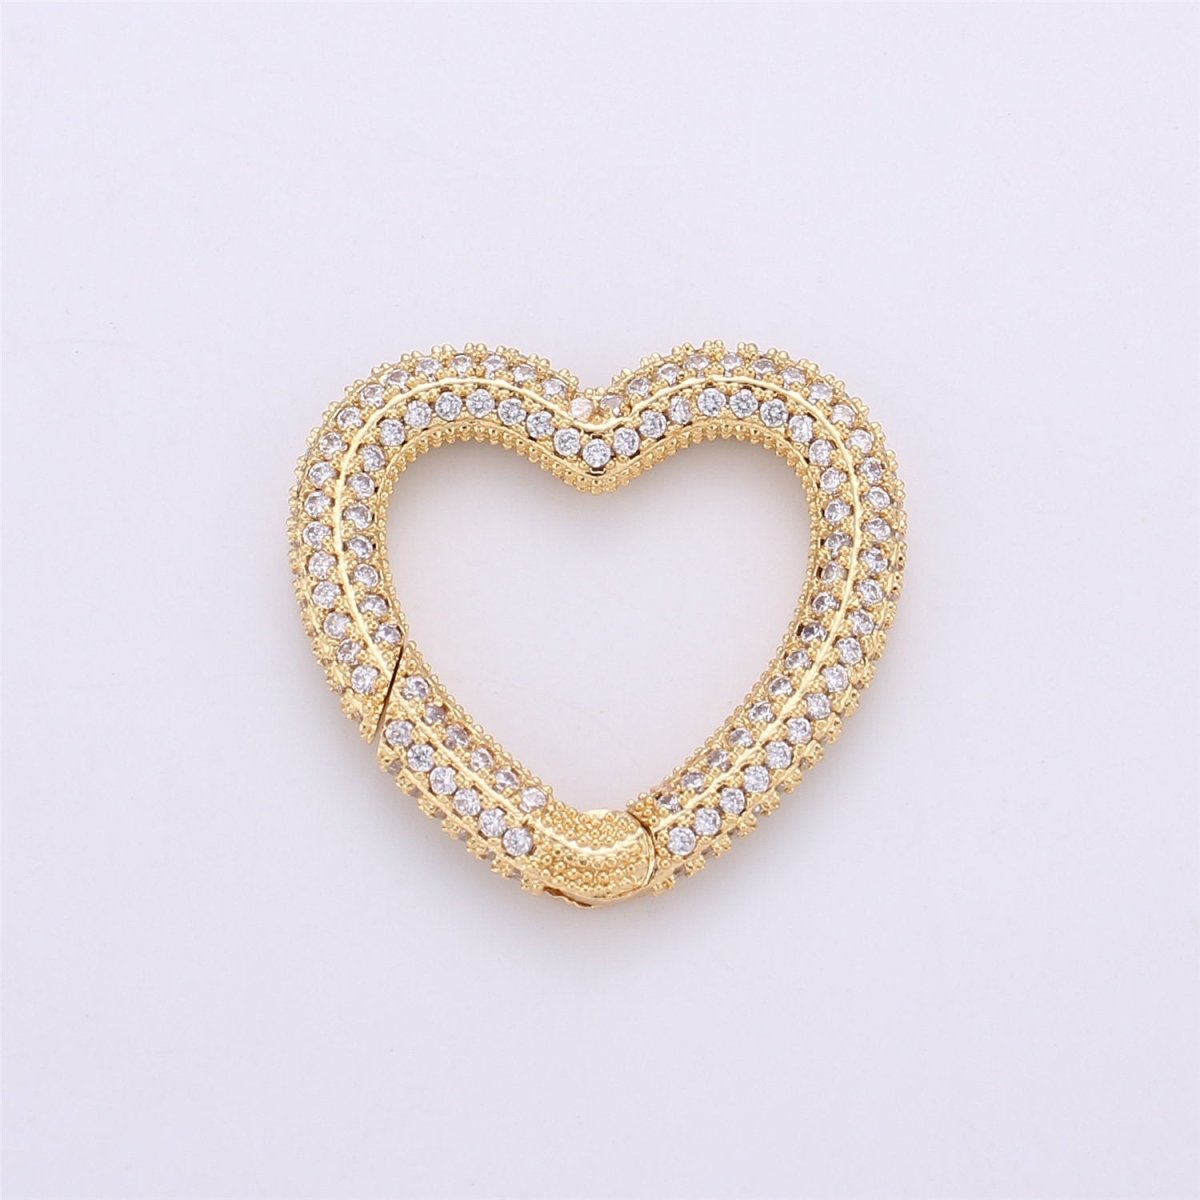 Micro Pave Diamond Heart w/ Screw Mechanism Clasp, Gold Silver Black Rose Gold Carabiner Snap Lock Supply for heavier chain connector L-256 L-257 K-366 - K-368 - DLUXCA